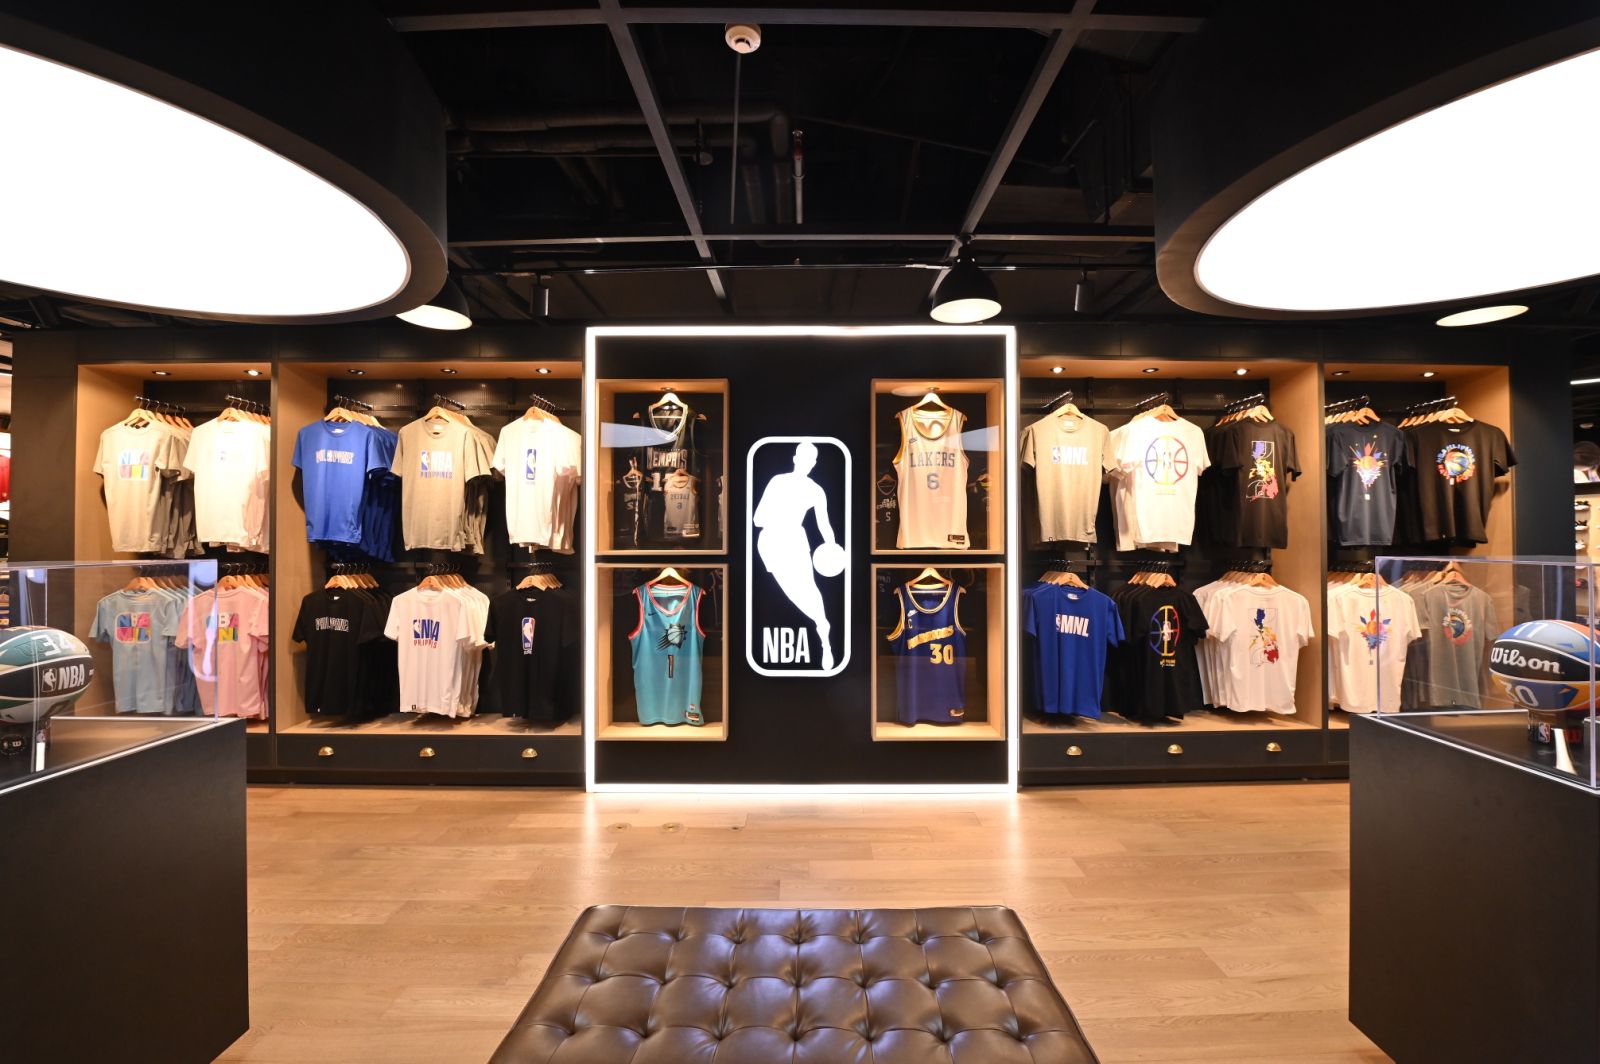 5 Things That We Loved About Manila's New NBA Store - The Game